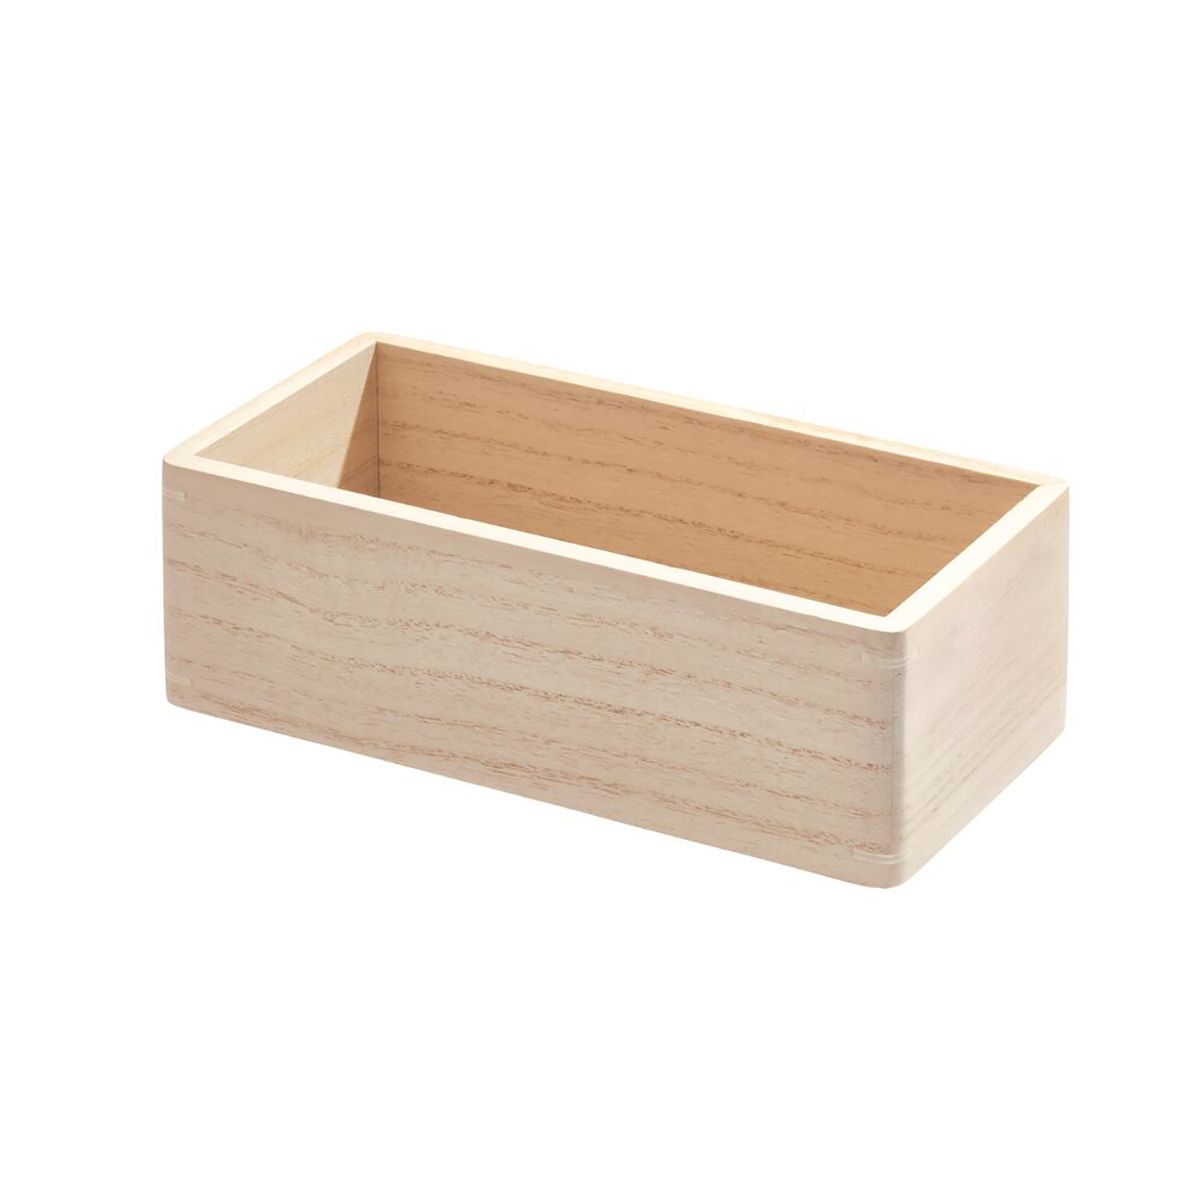 THE HOME EDIT Medium Wooden Bin Organizer Sand | The Container Store